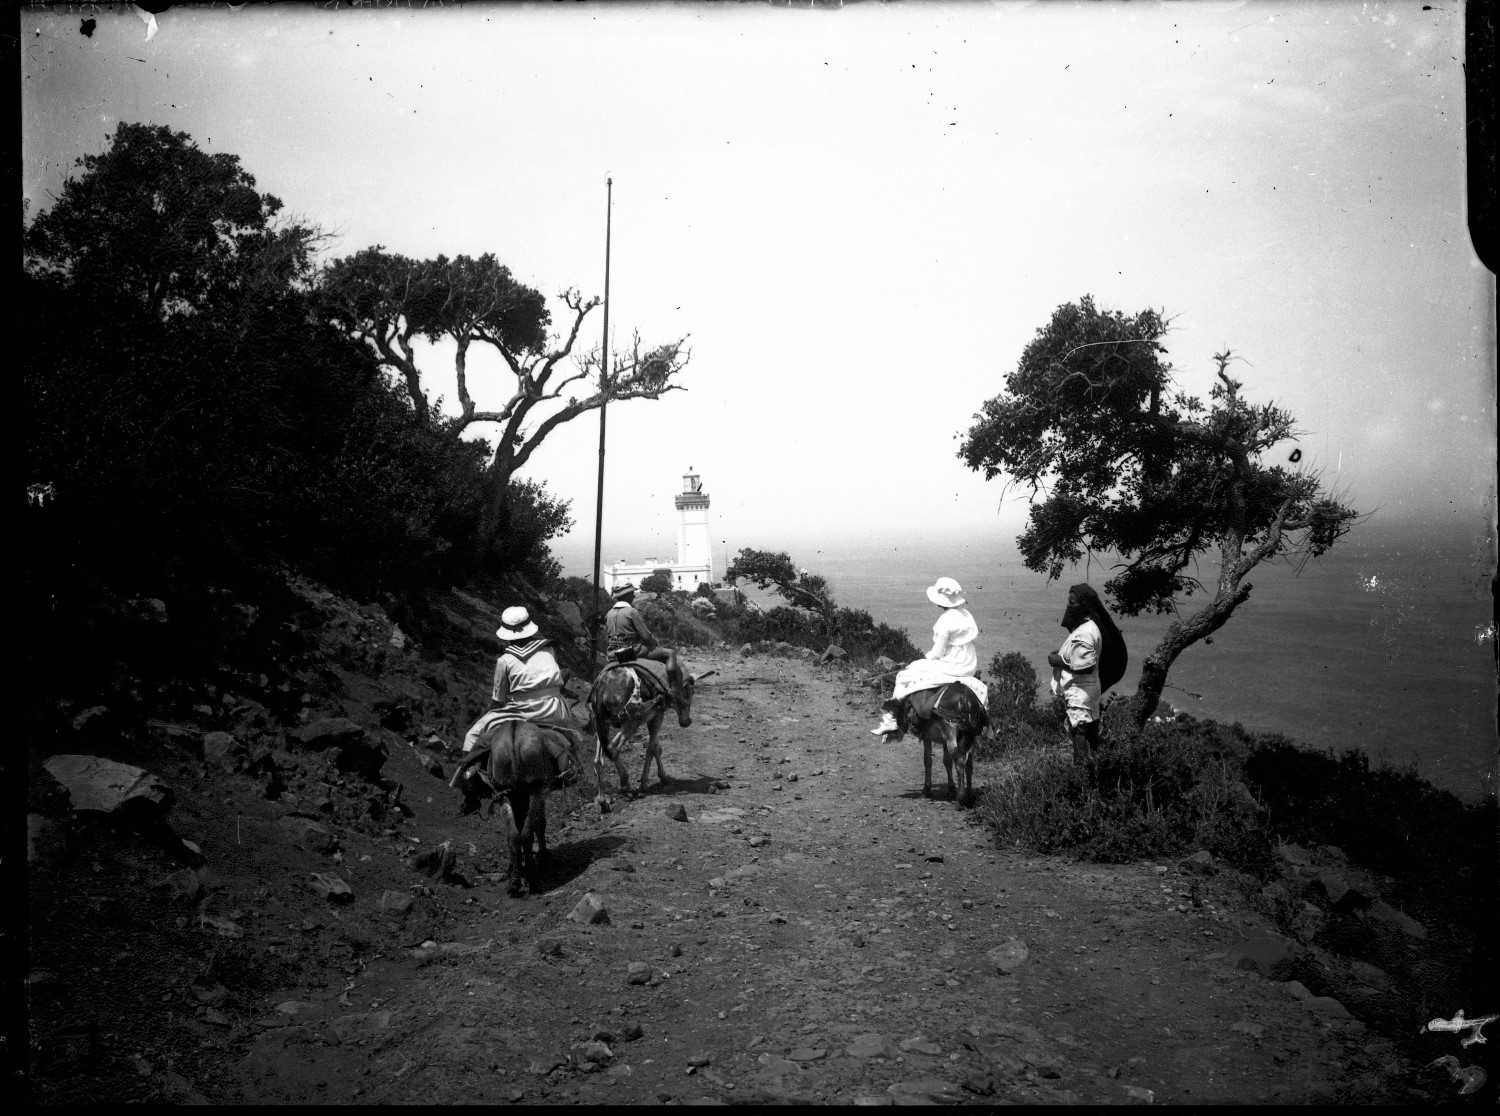 Women on donkeys on the road to Cap Spartel Lighthouse